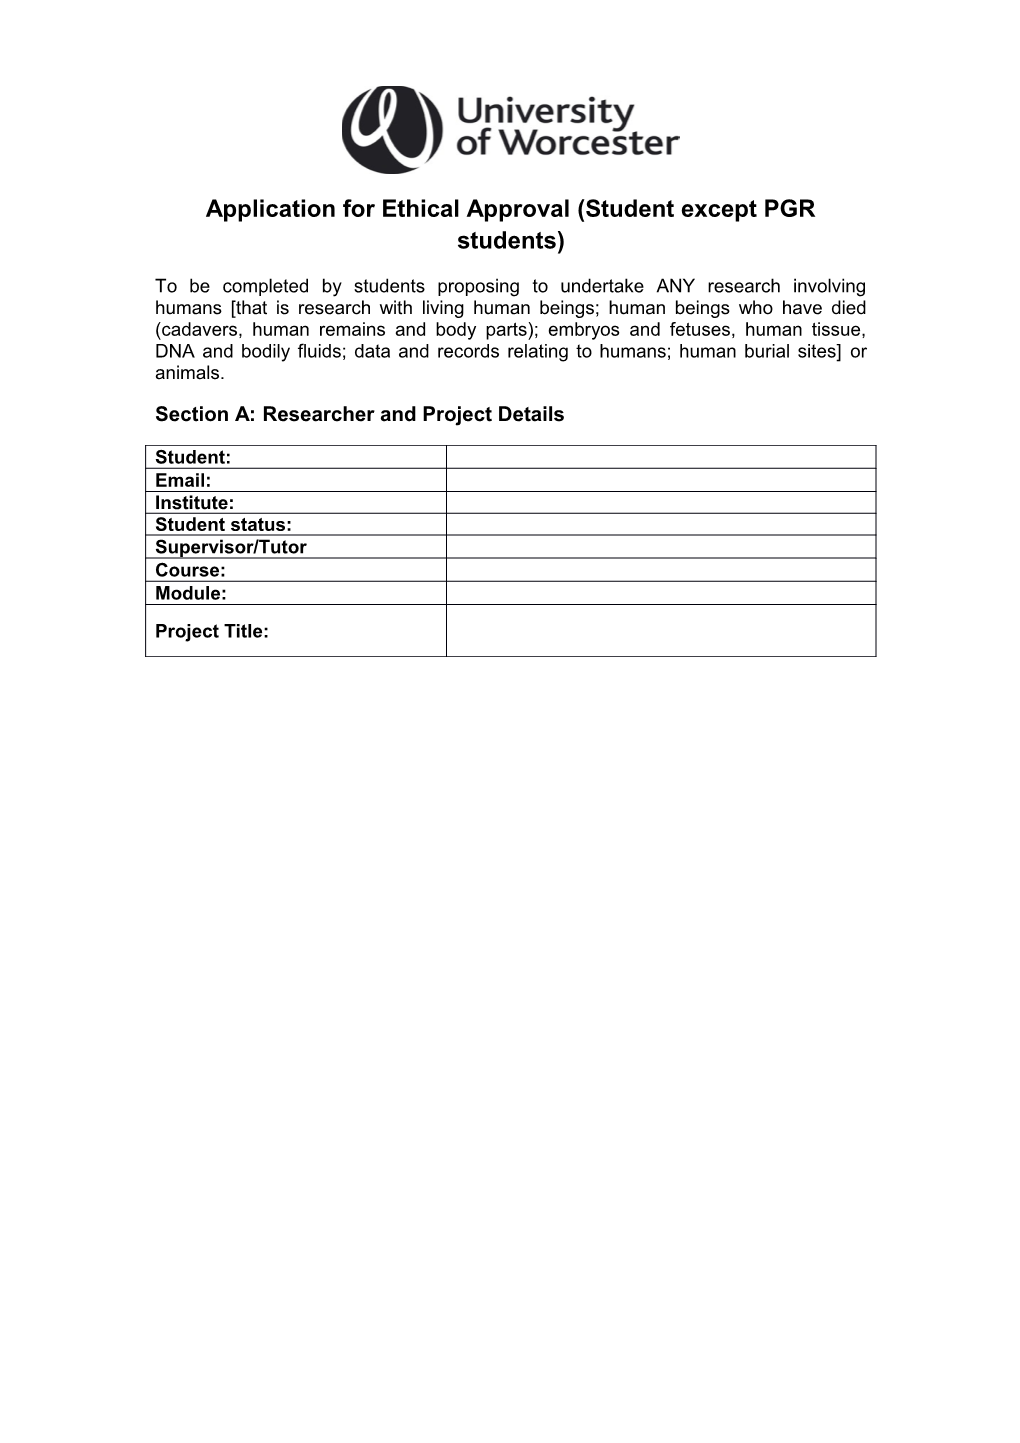 Application for Ethical Approval (Student Except PGR Students)